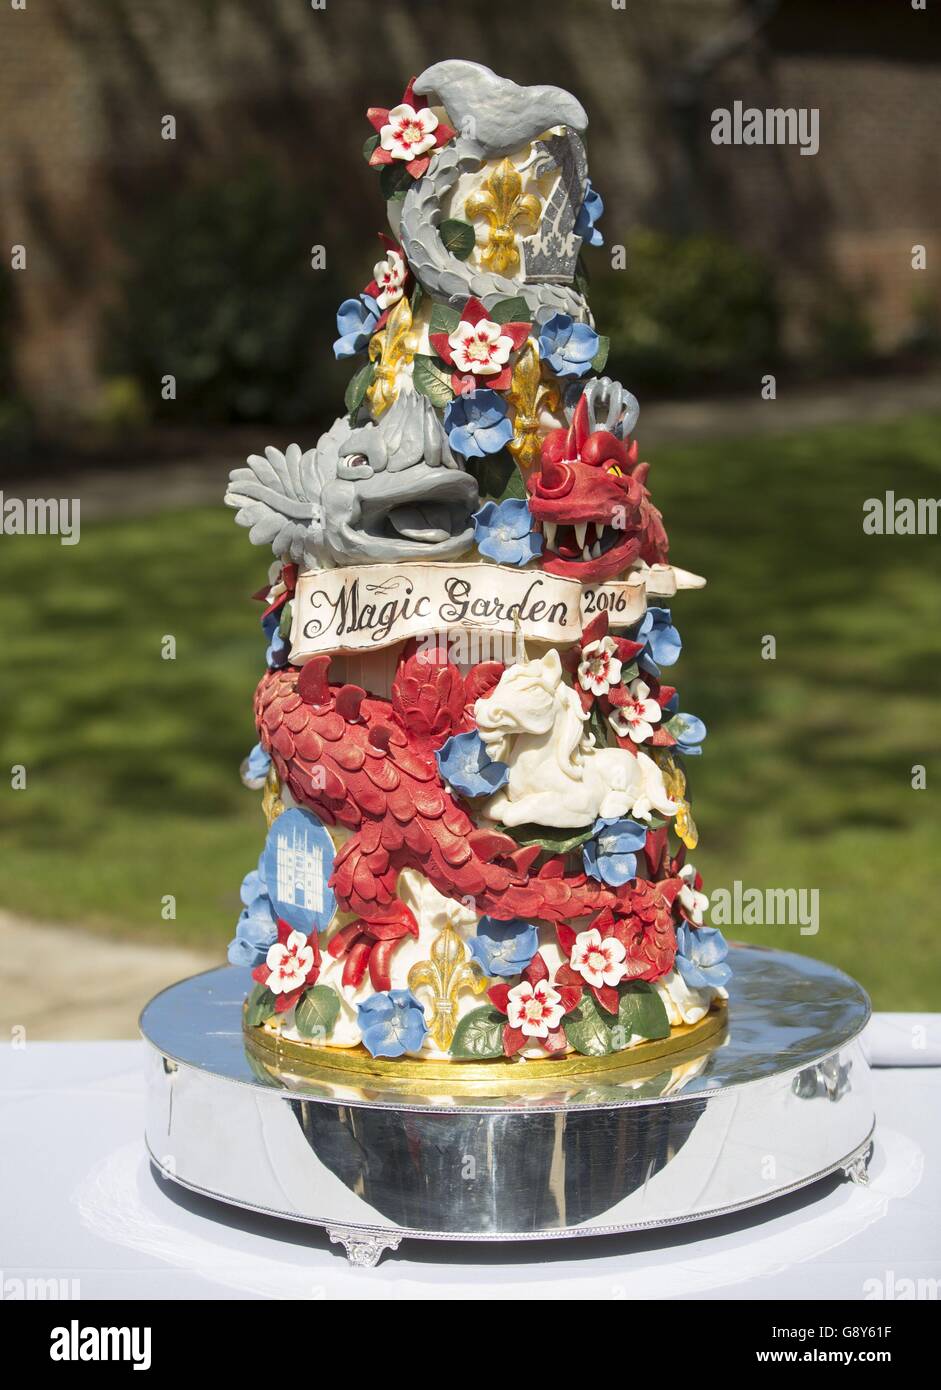 The ornate cake decorated with dragons and magical creatures viewed by the Duchess of Cambridge at Hampton Court's Magic Garden, marking the official opening of the palace's new children's play area. Stock Photo